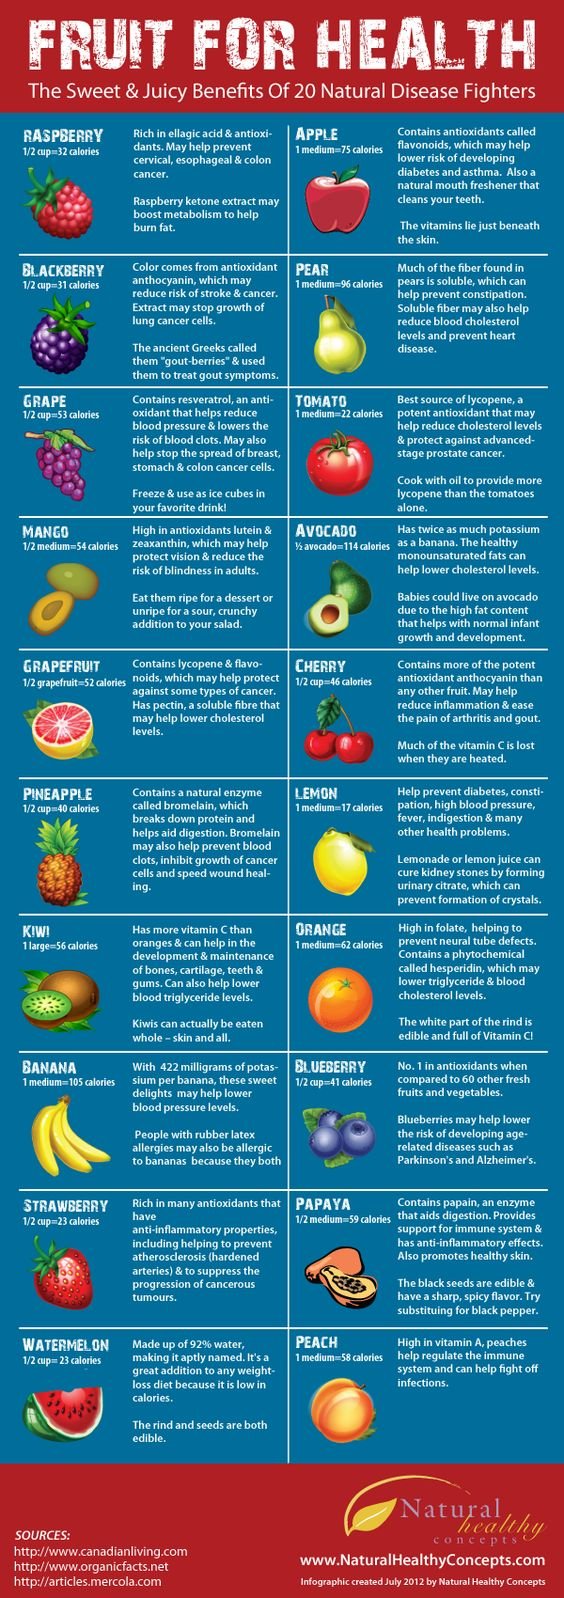 3 Reasons Why Fruits Are Important For Your Health